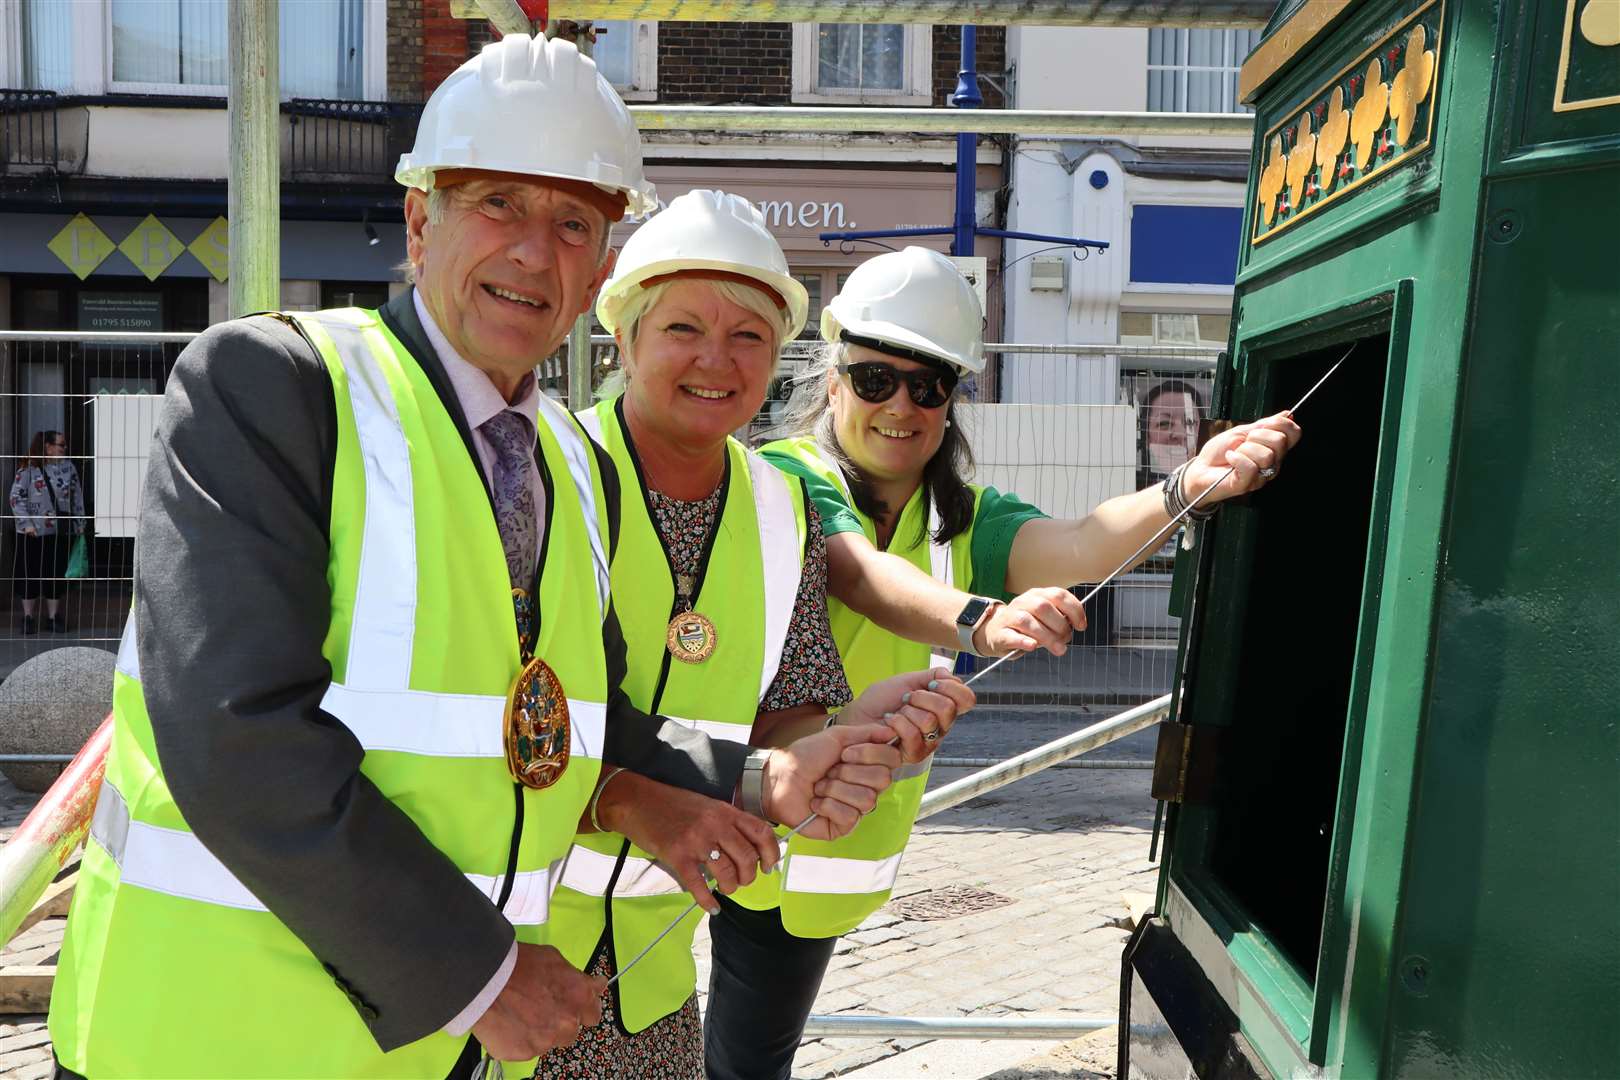 Swale's mayor Paul Stephen, with his wife Sarah and Cllr Monique Bonney, right, had the honour of being the first to ring the bell in the refurbished Sheerness clock tower. Picture: John Nurden